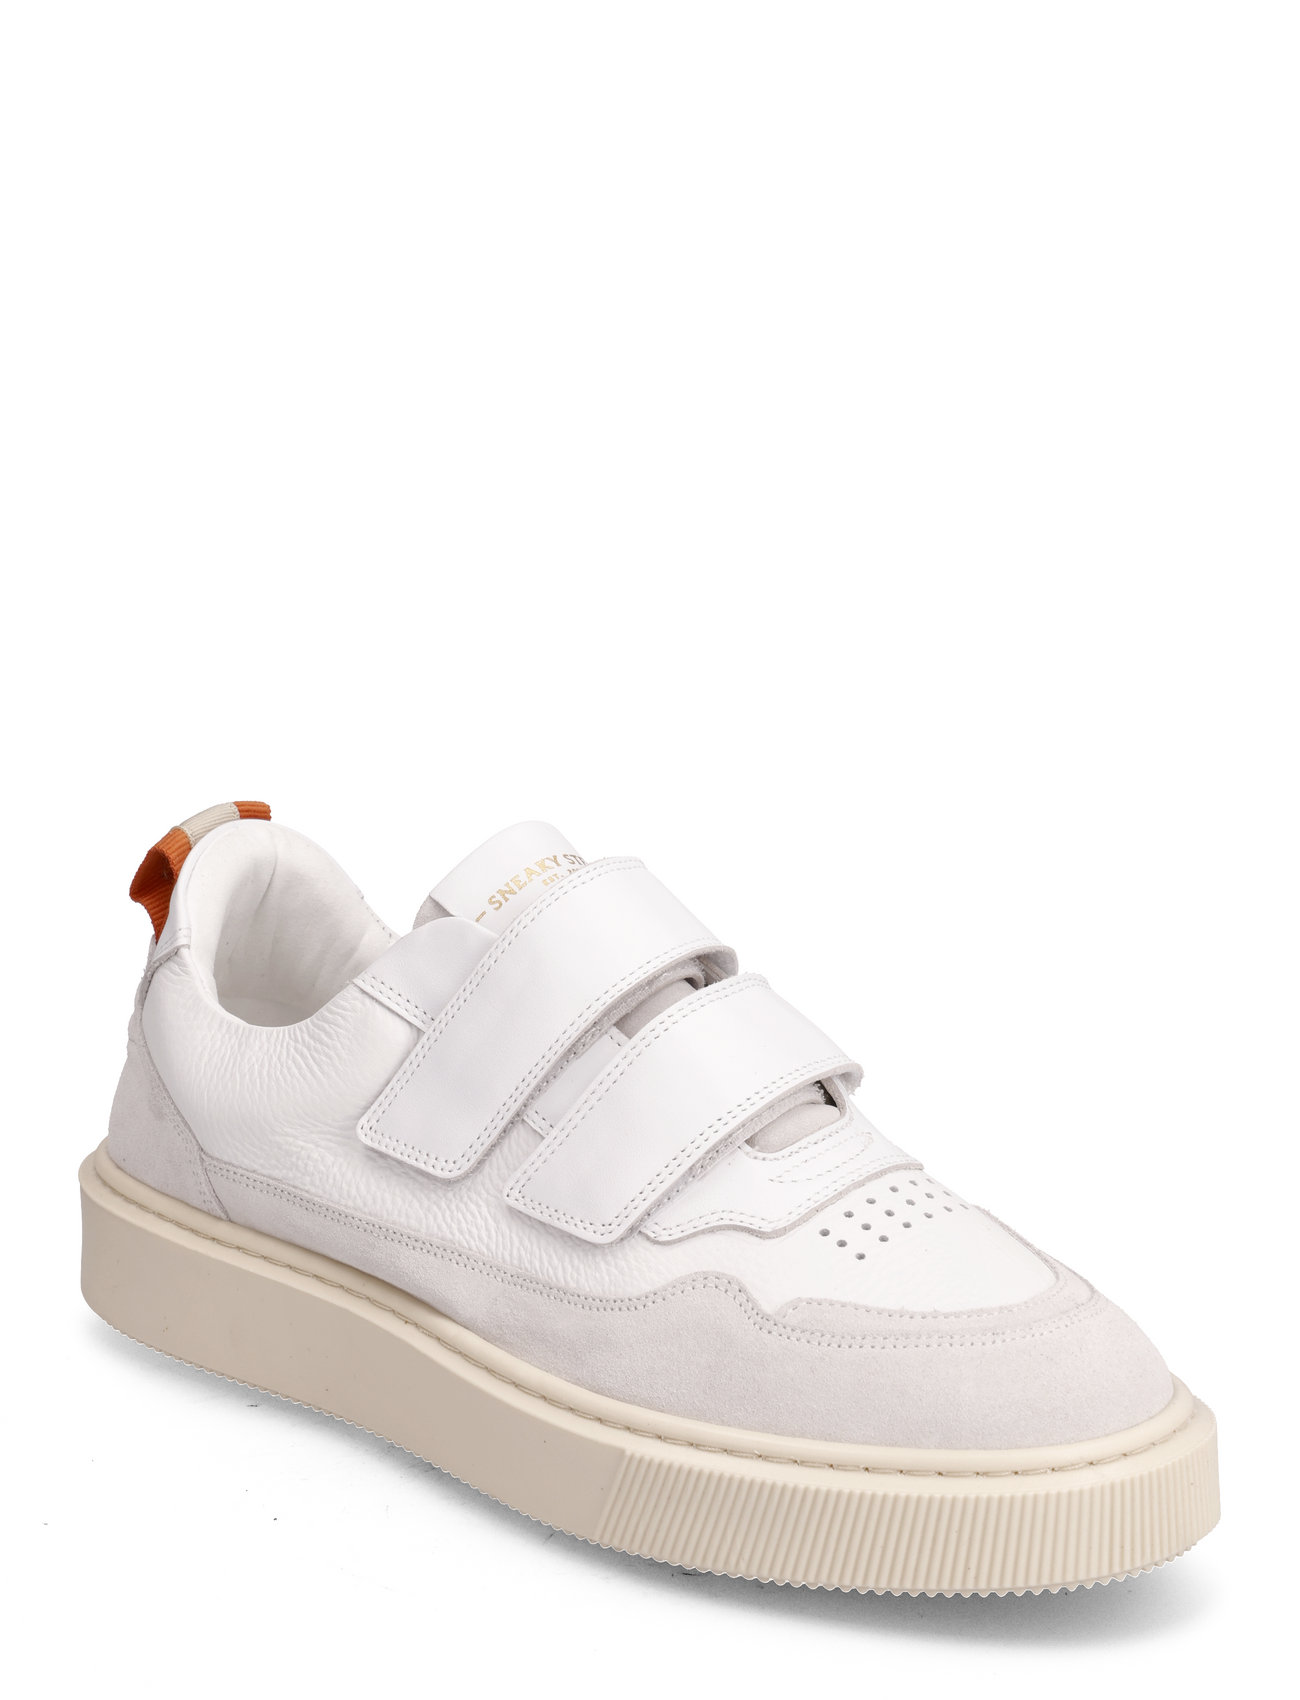 Sneaky Steve Apex Leather Shoe - Lave sneakers - Boozt.com